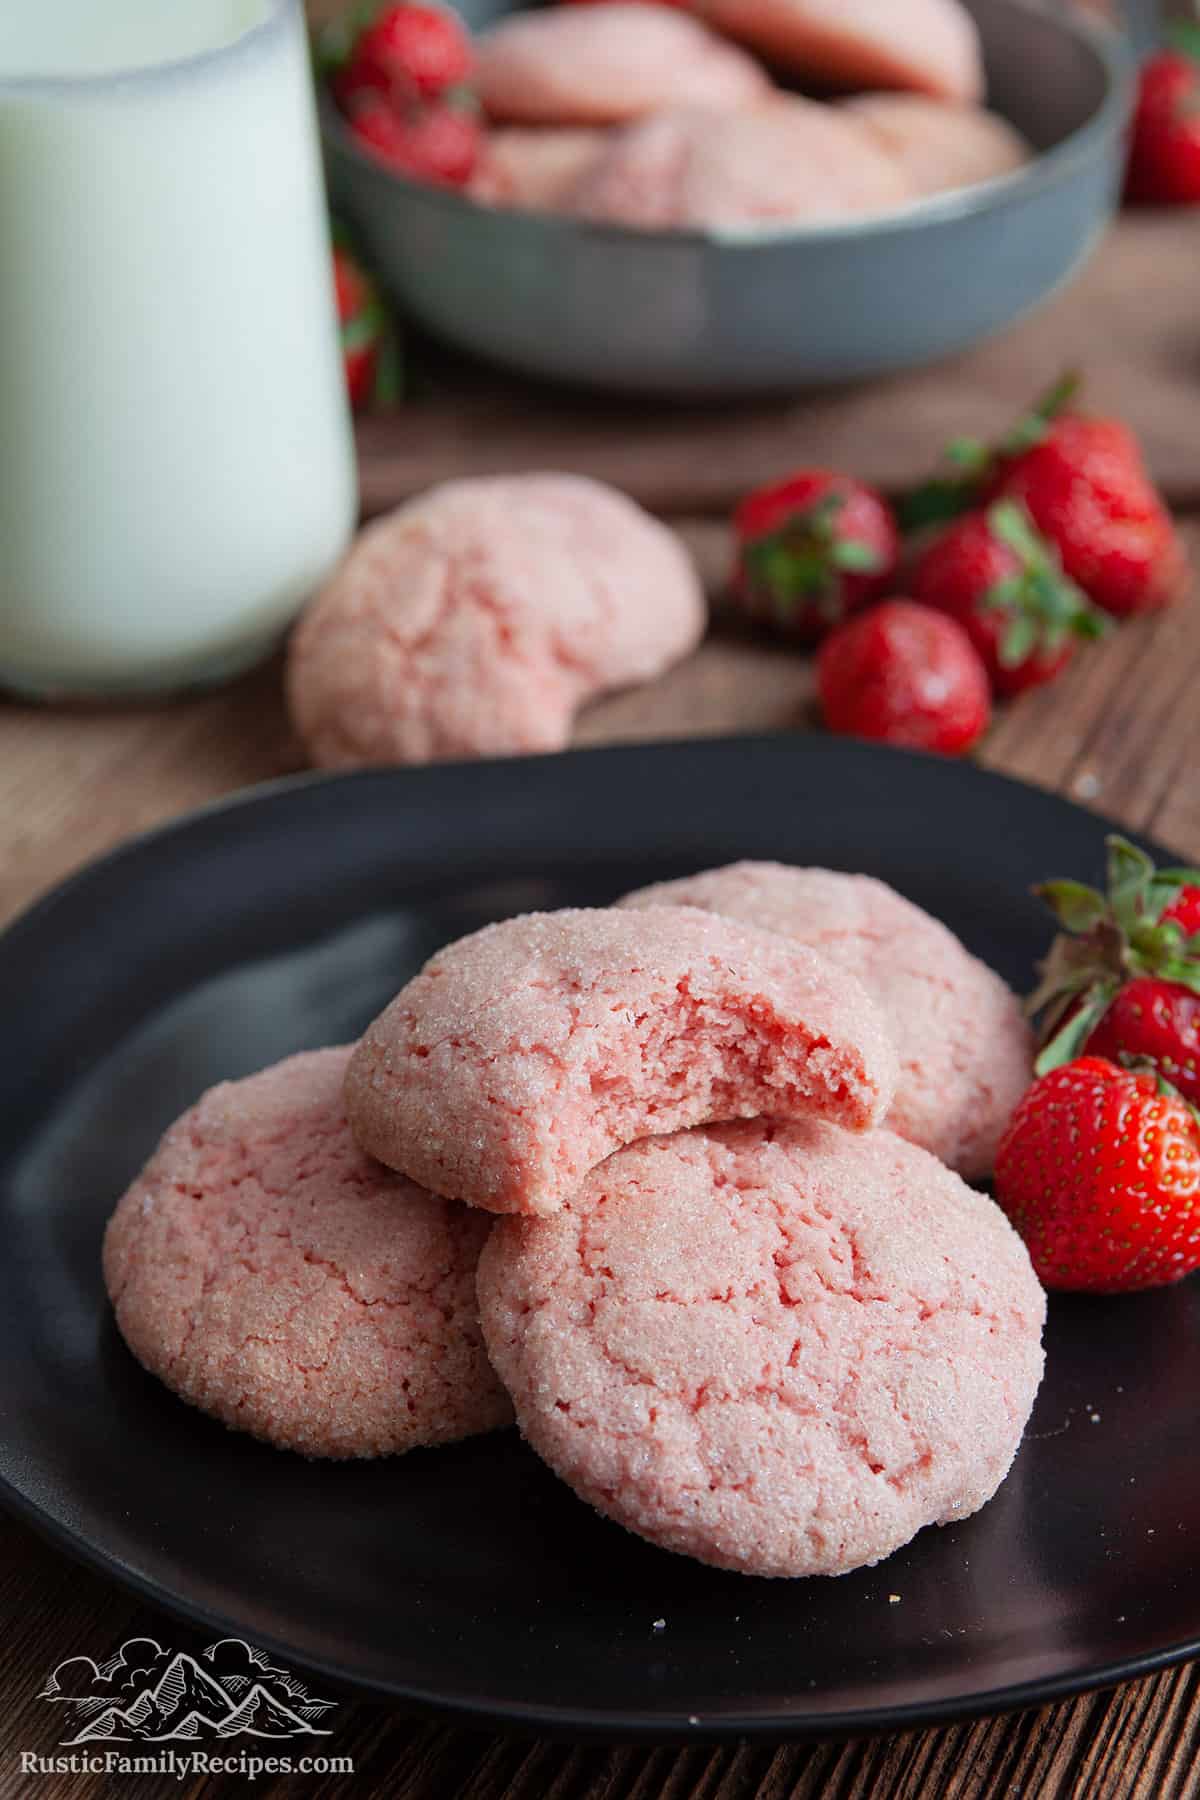 strawberry cookies on a plate with a bite taken out of one